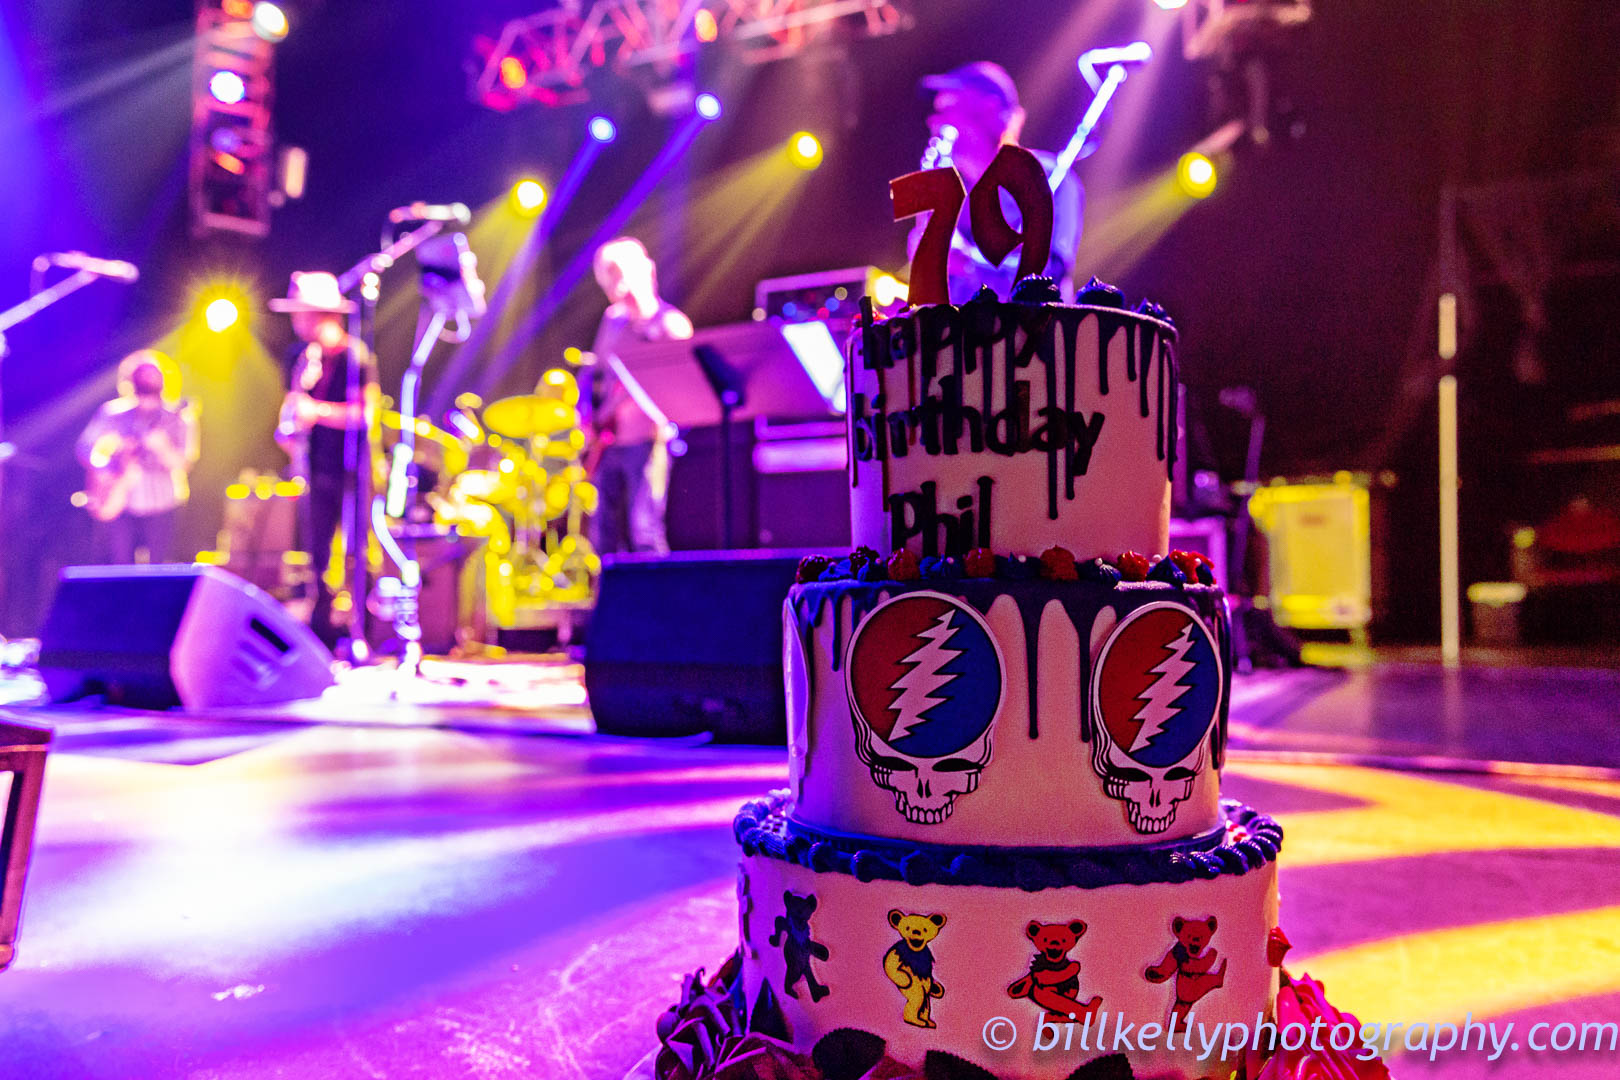 Phil Lesh & Friends’ 79th Birthday Celebration Weekend at The Capitol Theatre (A Gallery)